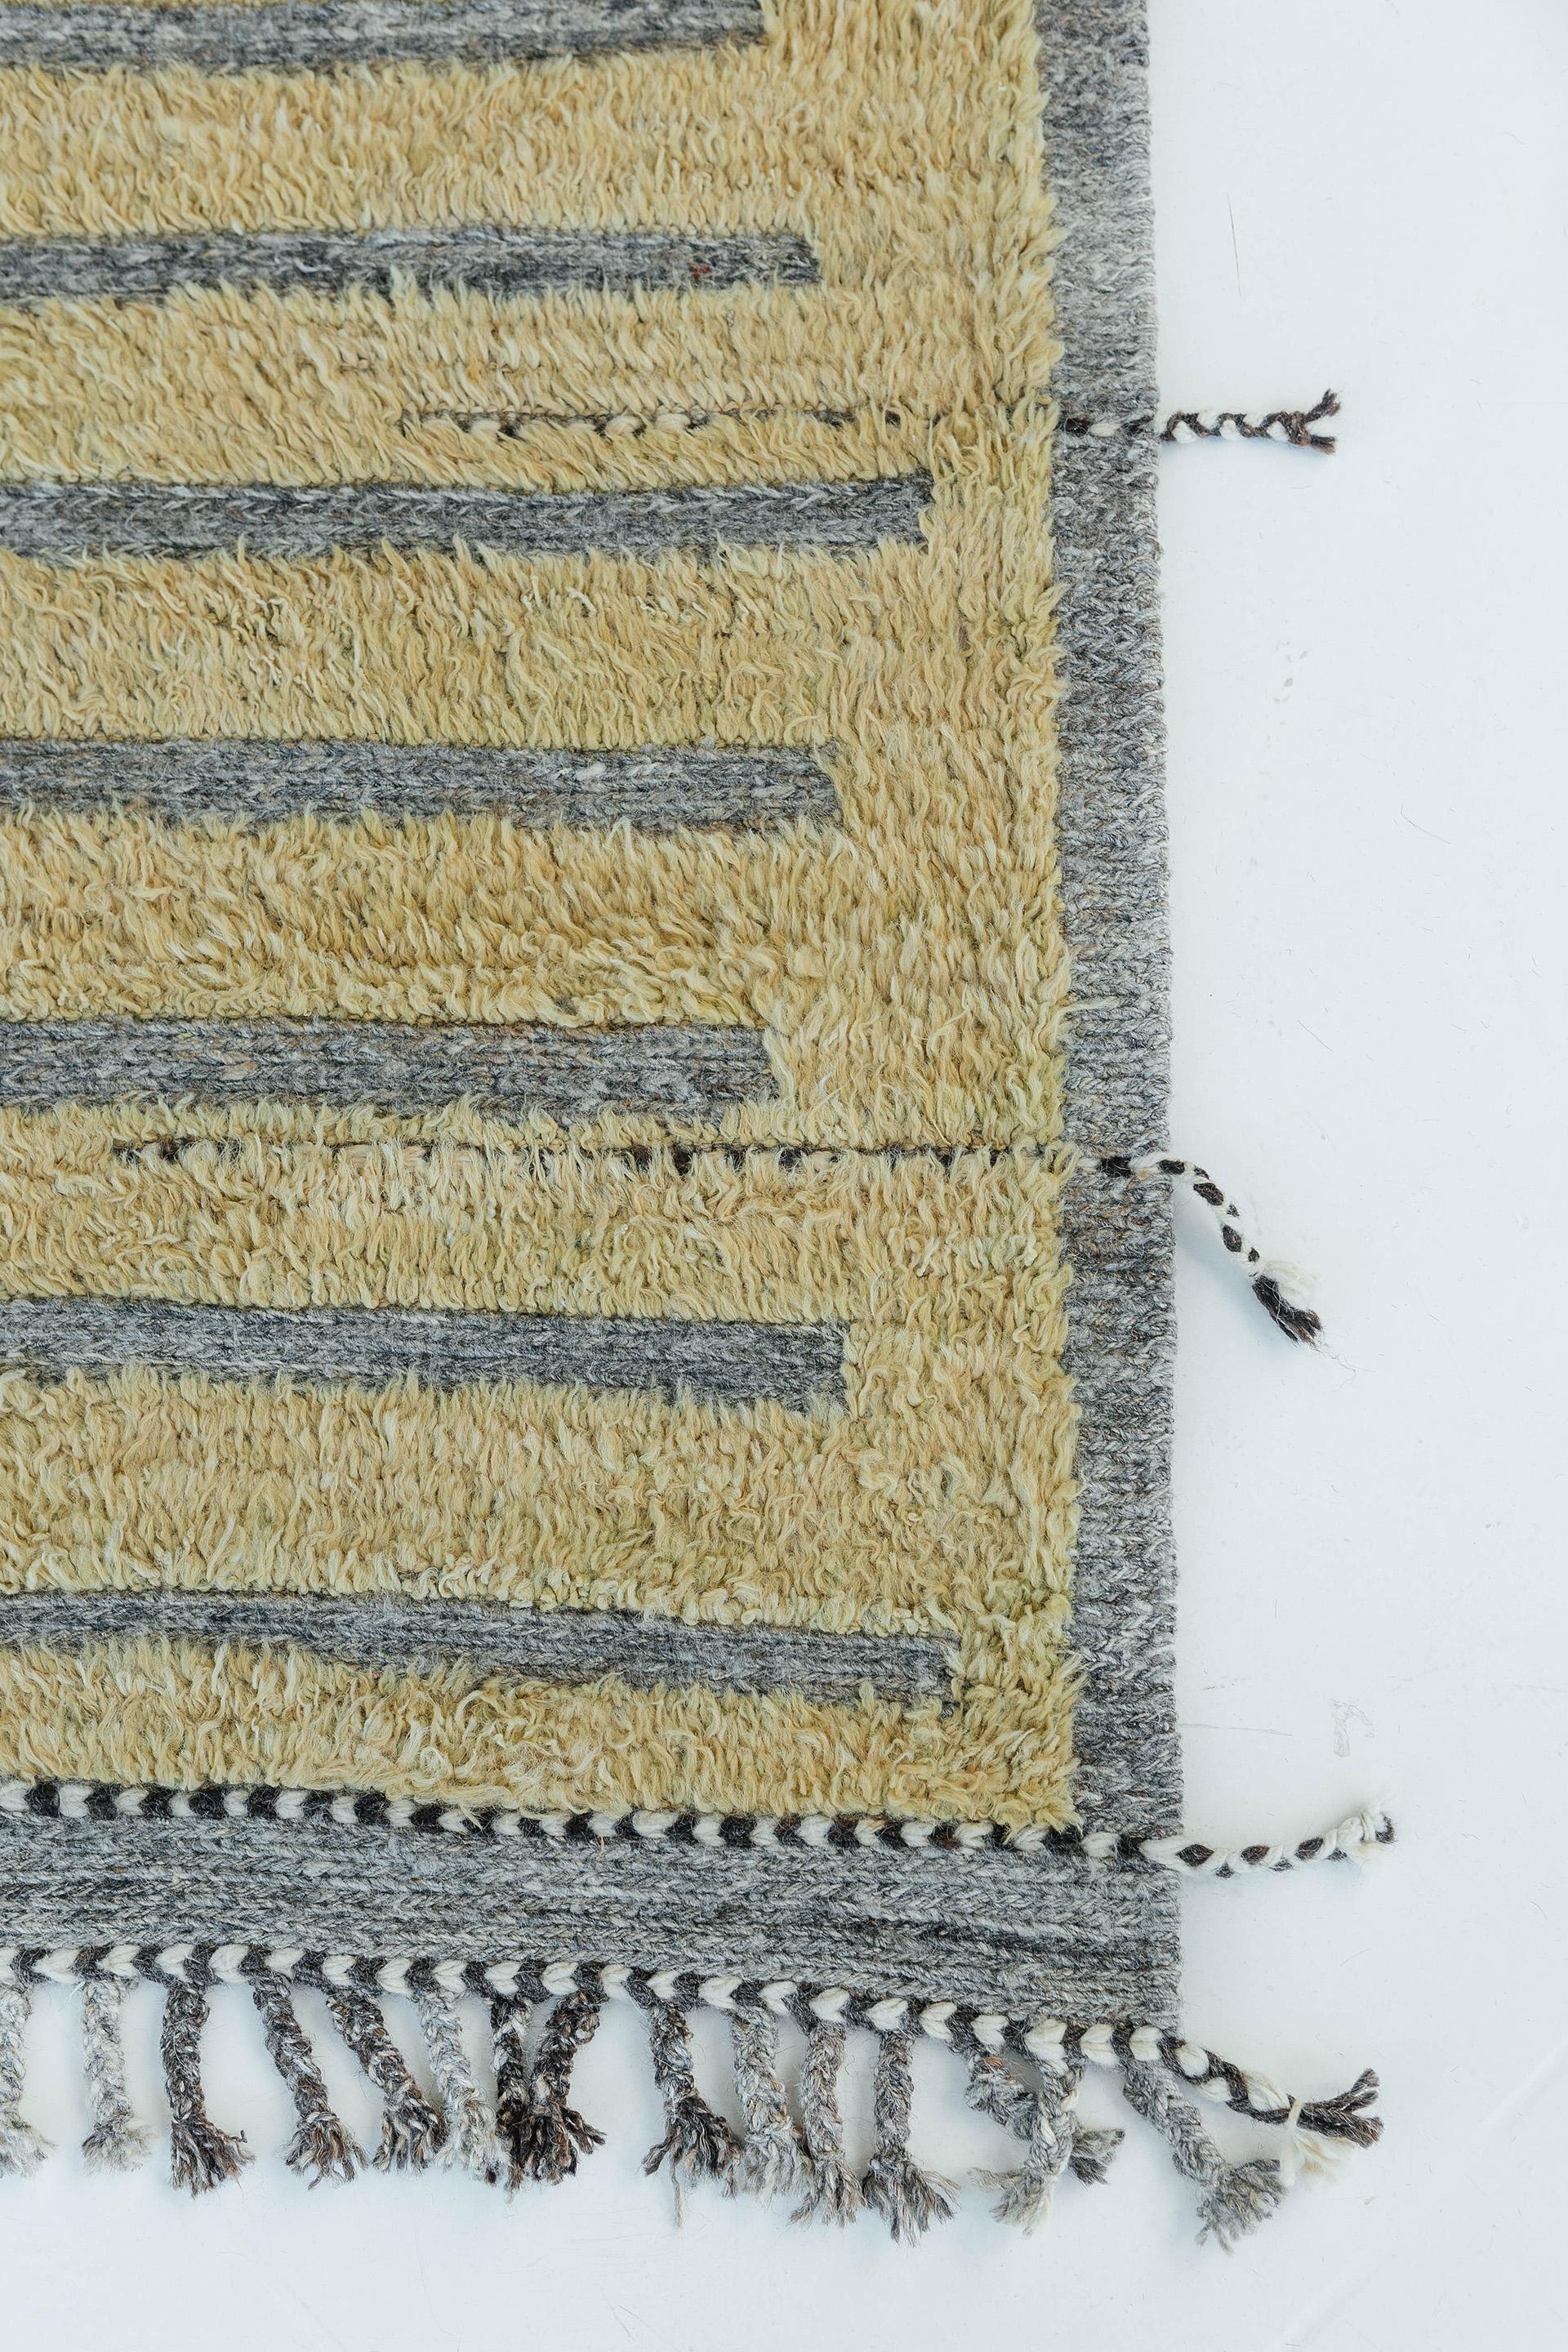 Handwoven of wool, Rashabar uses linework and color to create definition and movement. Embossed detailing of charcoal and taupe-grey moves across the rug with a yellow shag surface. Natural flat weave runs around the border with tasseled